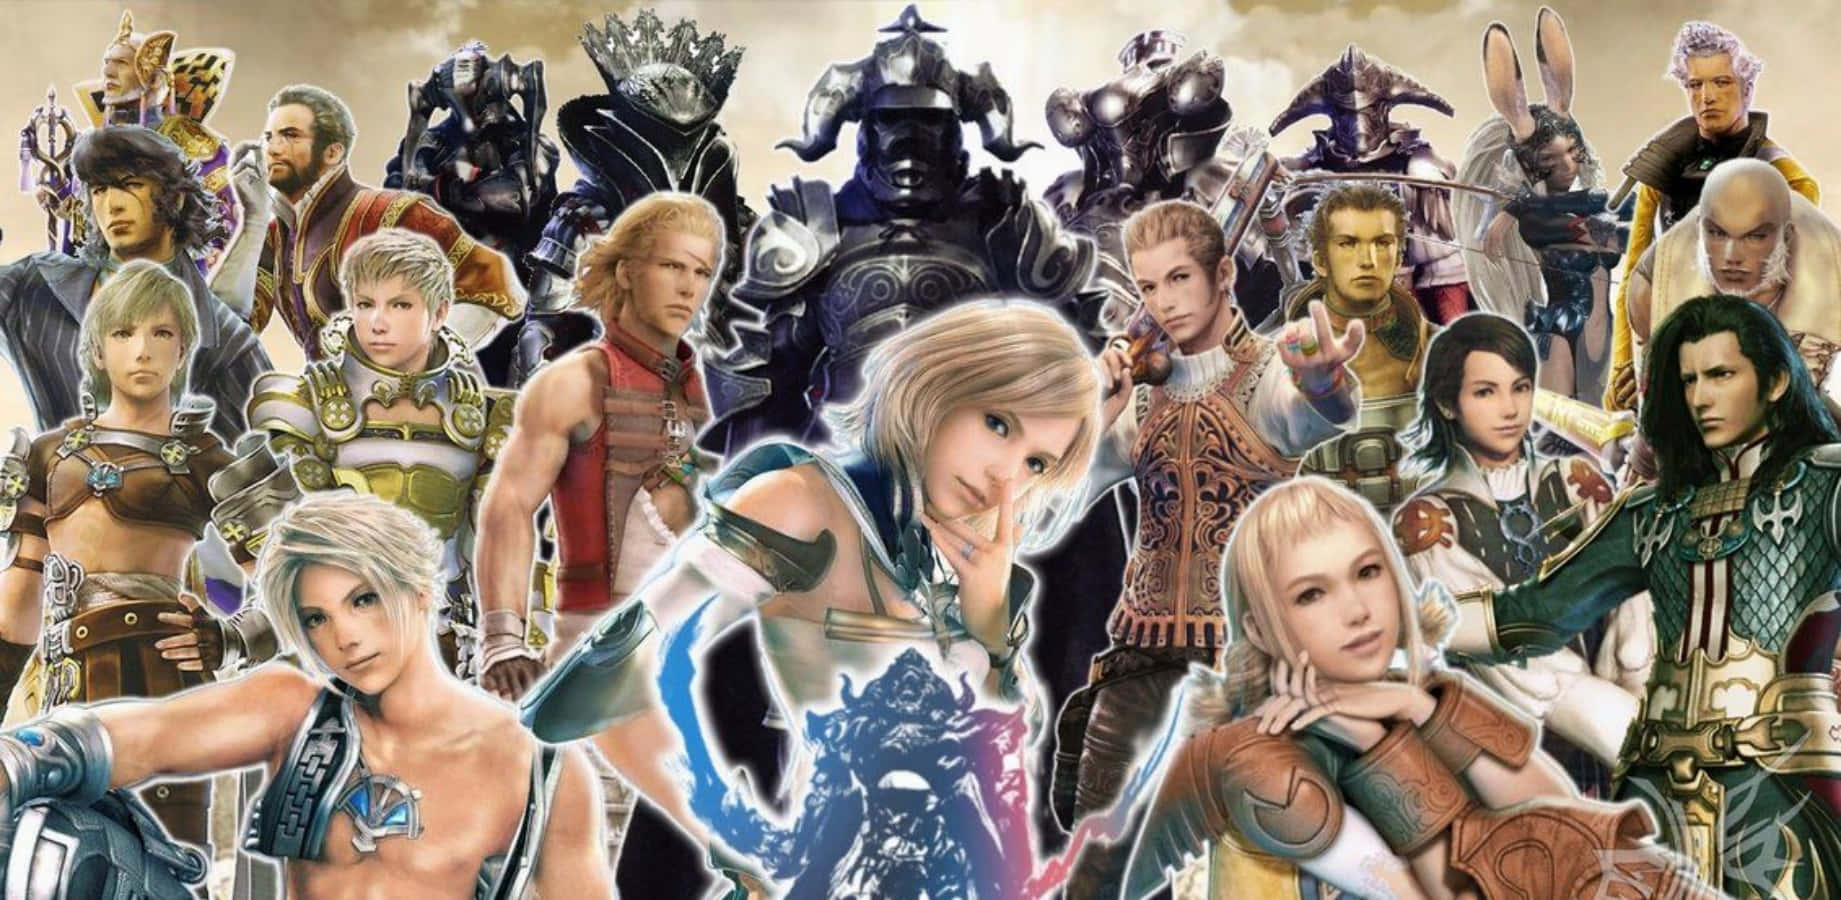 Iconic Final Fantasy Characters Together Wallpaper